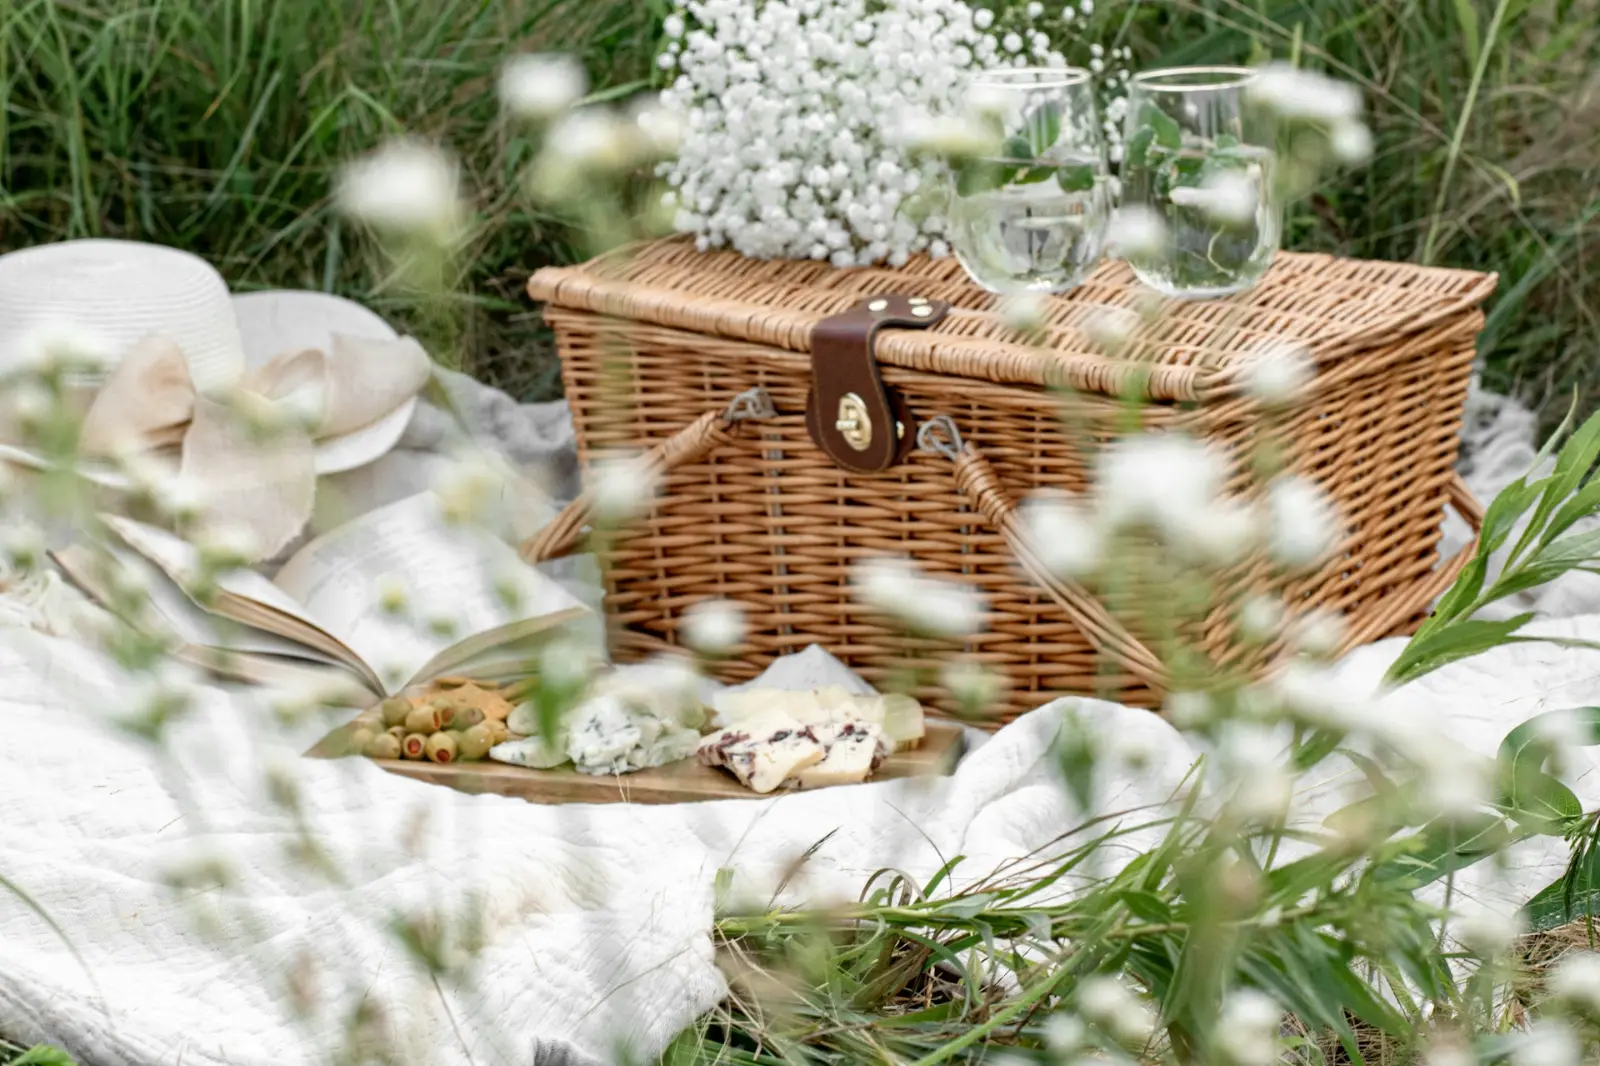 The Picnic Paradise: Healthy in a Basket